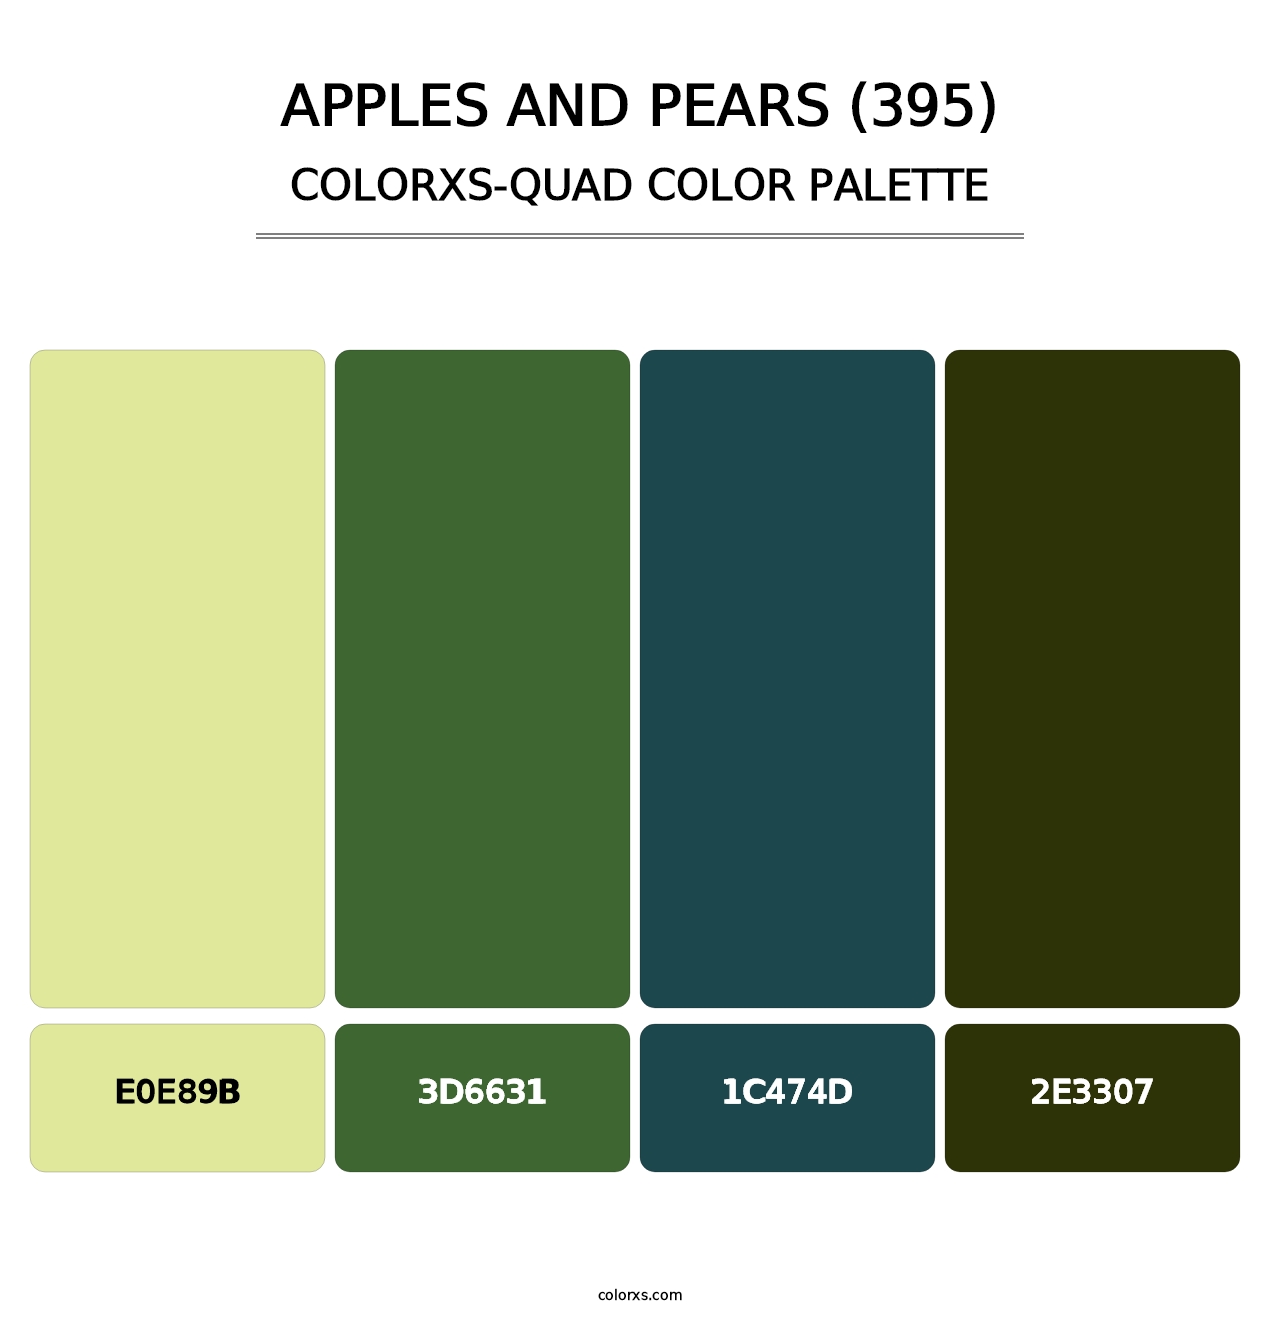 Apples and Pears (395) - Colorxs Quad Palette